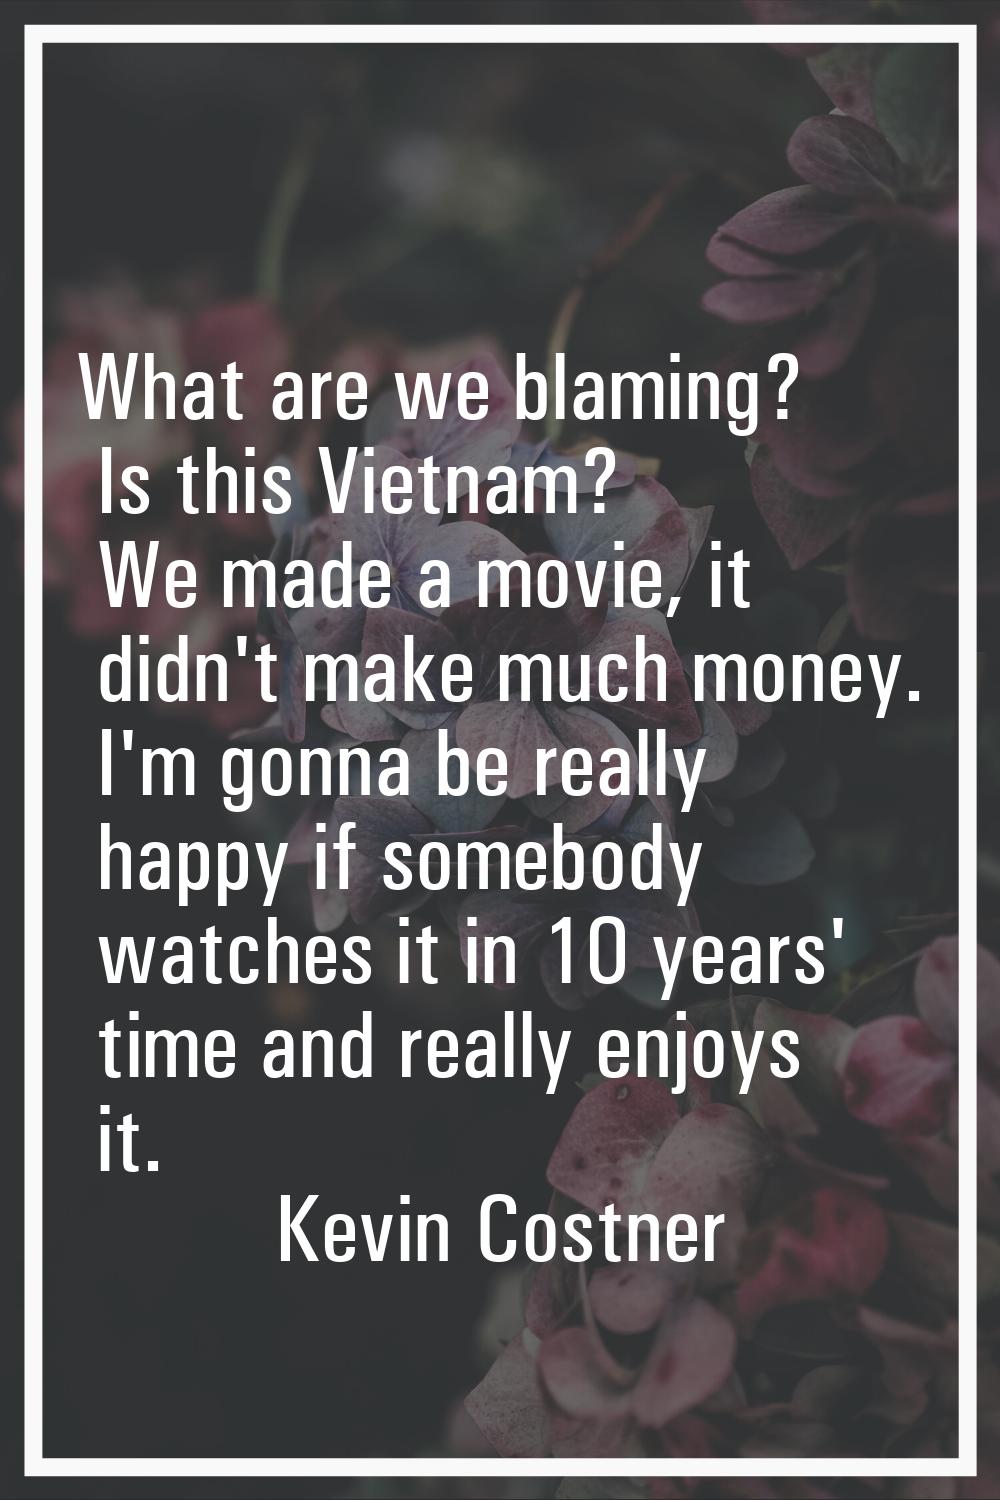 What are we blaming? Is this Vietnam? We made a movie, it didn't make much money. I'm gonna be real